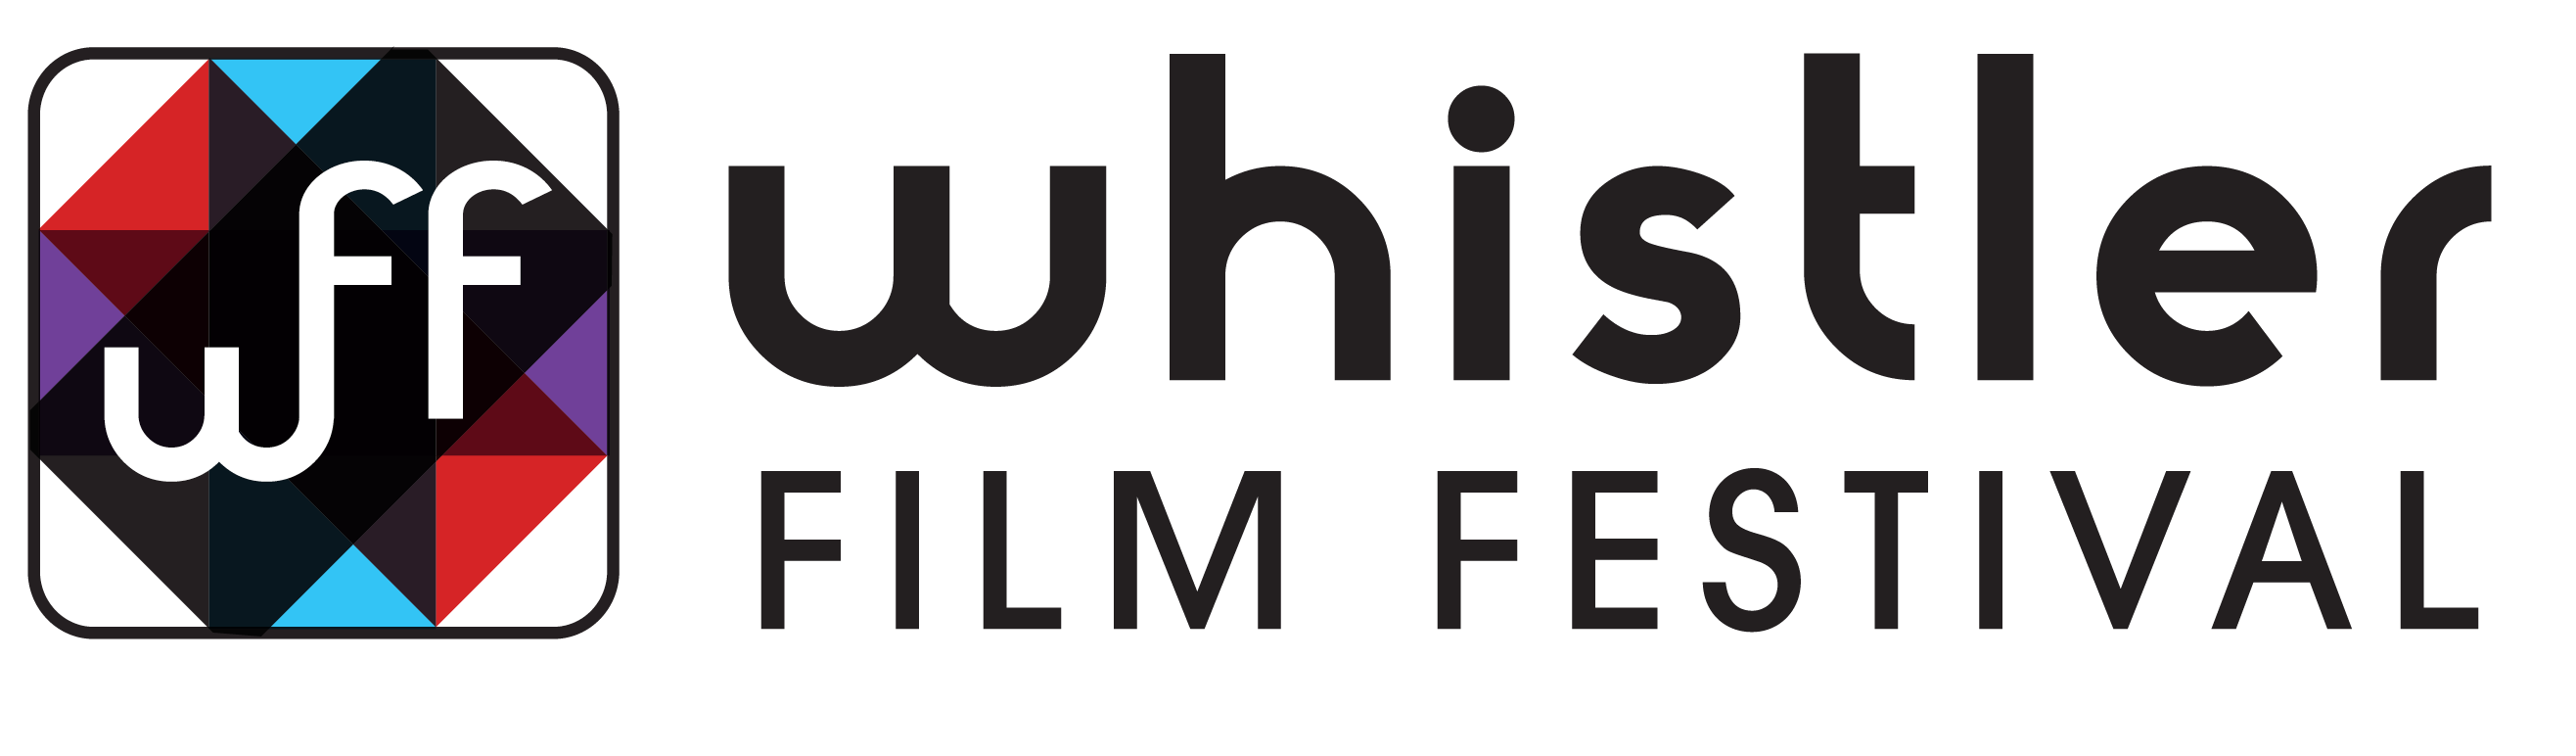 Whistler Film Festival logo, a square with overlapping multicoloured triangles to the left, and a wordmark to the right with the company name